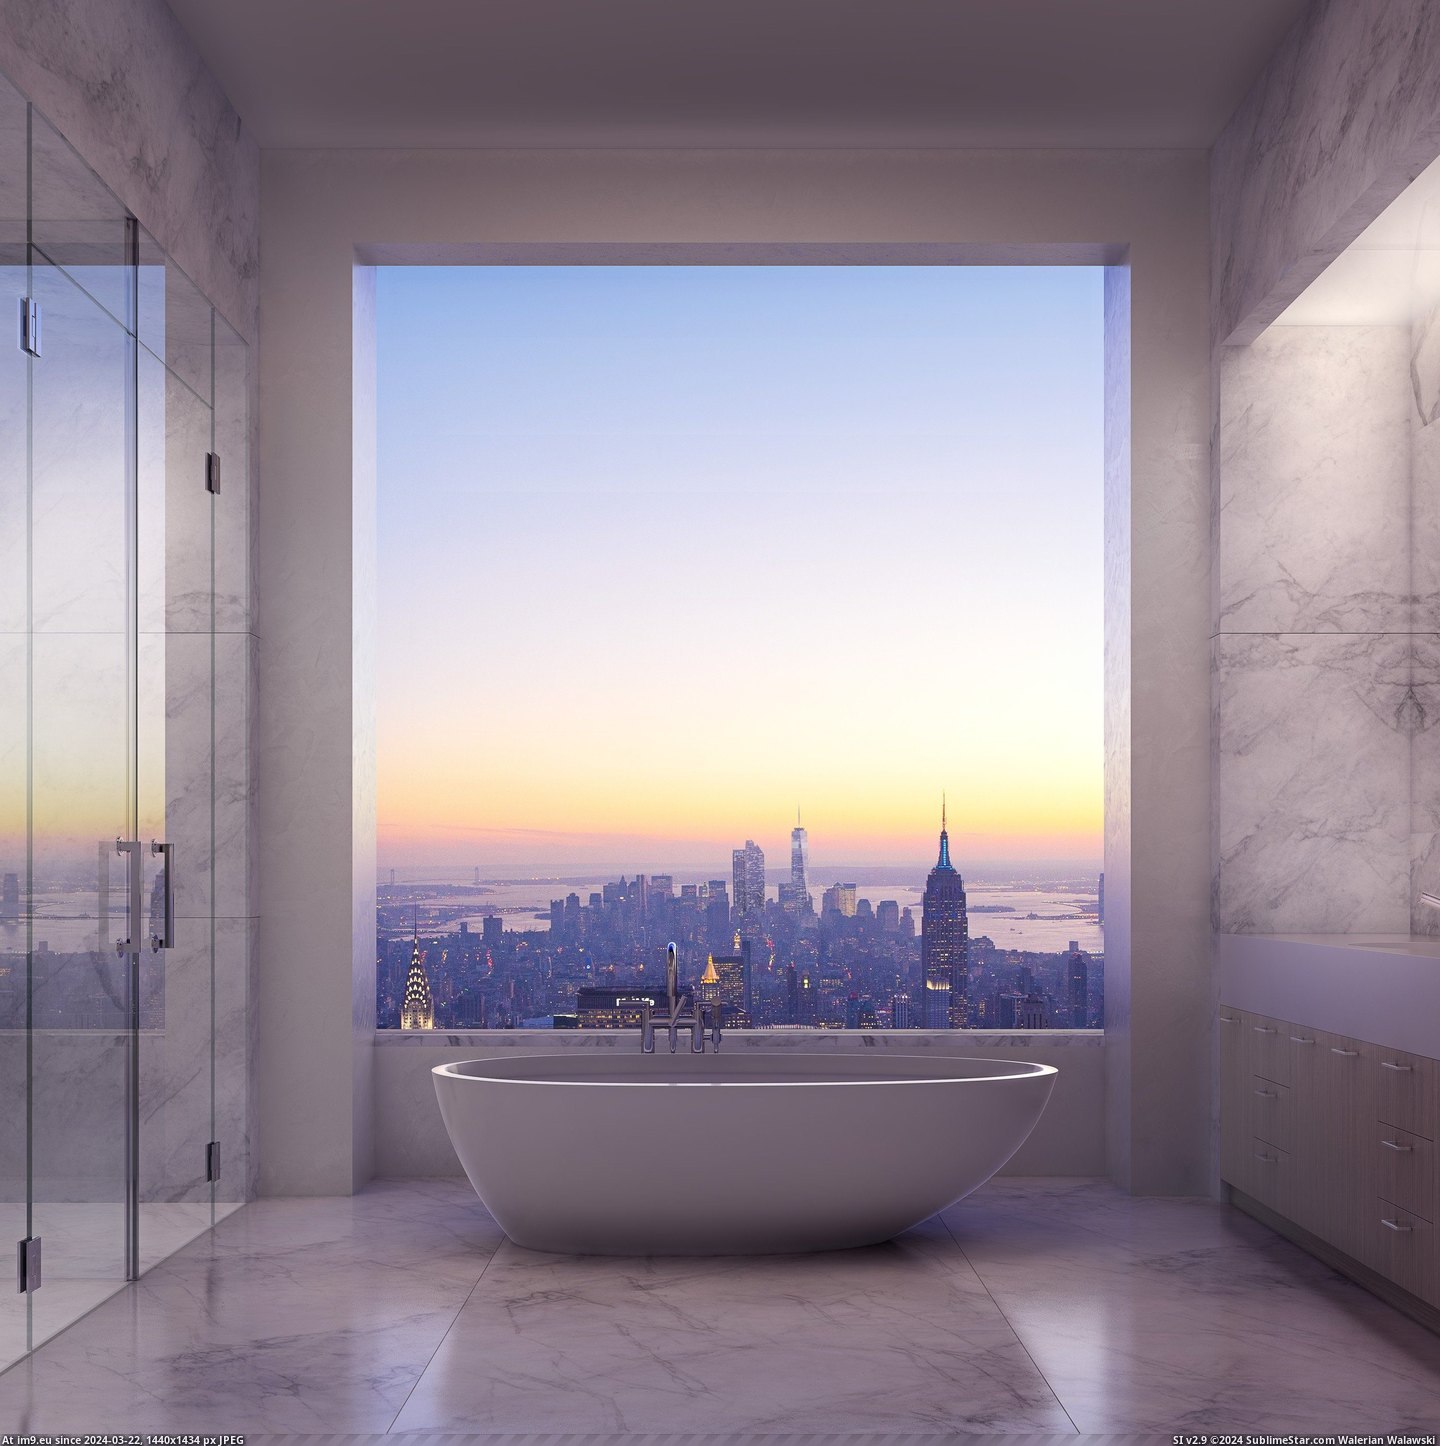 #Park #Bathroom #Avenue #Damn #Million [Pics] DAMN. The Bathroom View from the $95 Million Penthouse at 432 Park Avenue, NY ( MostBeautiful) Pic. (Image of album My r/PICS favs))